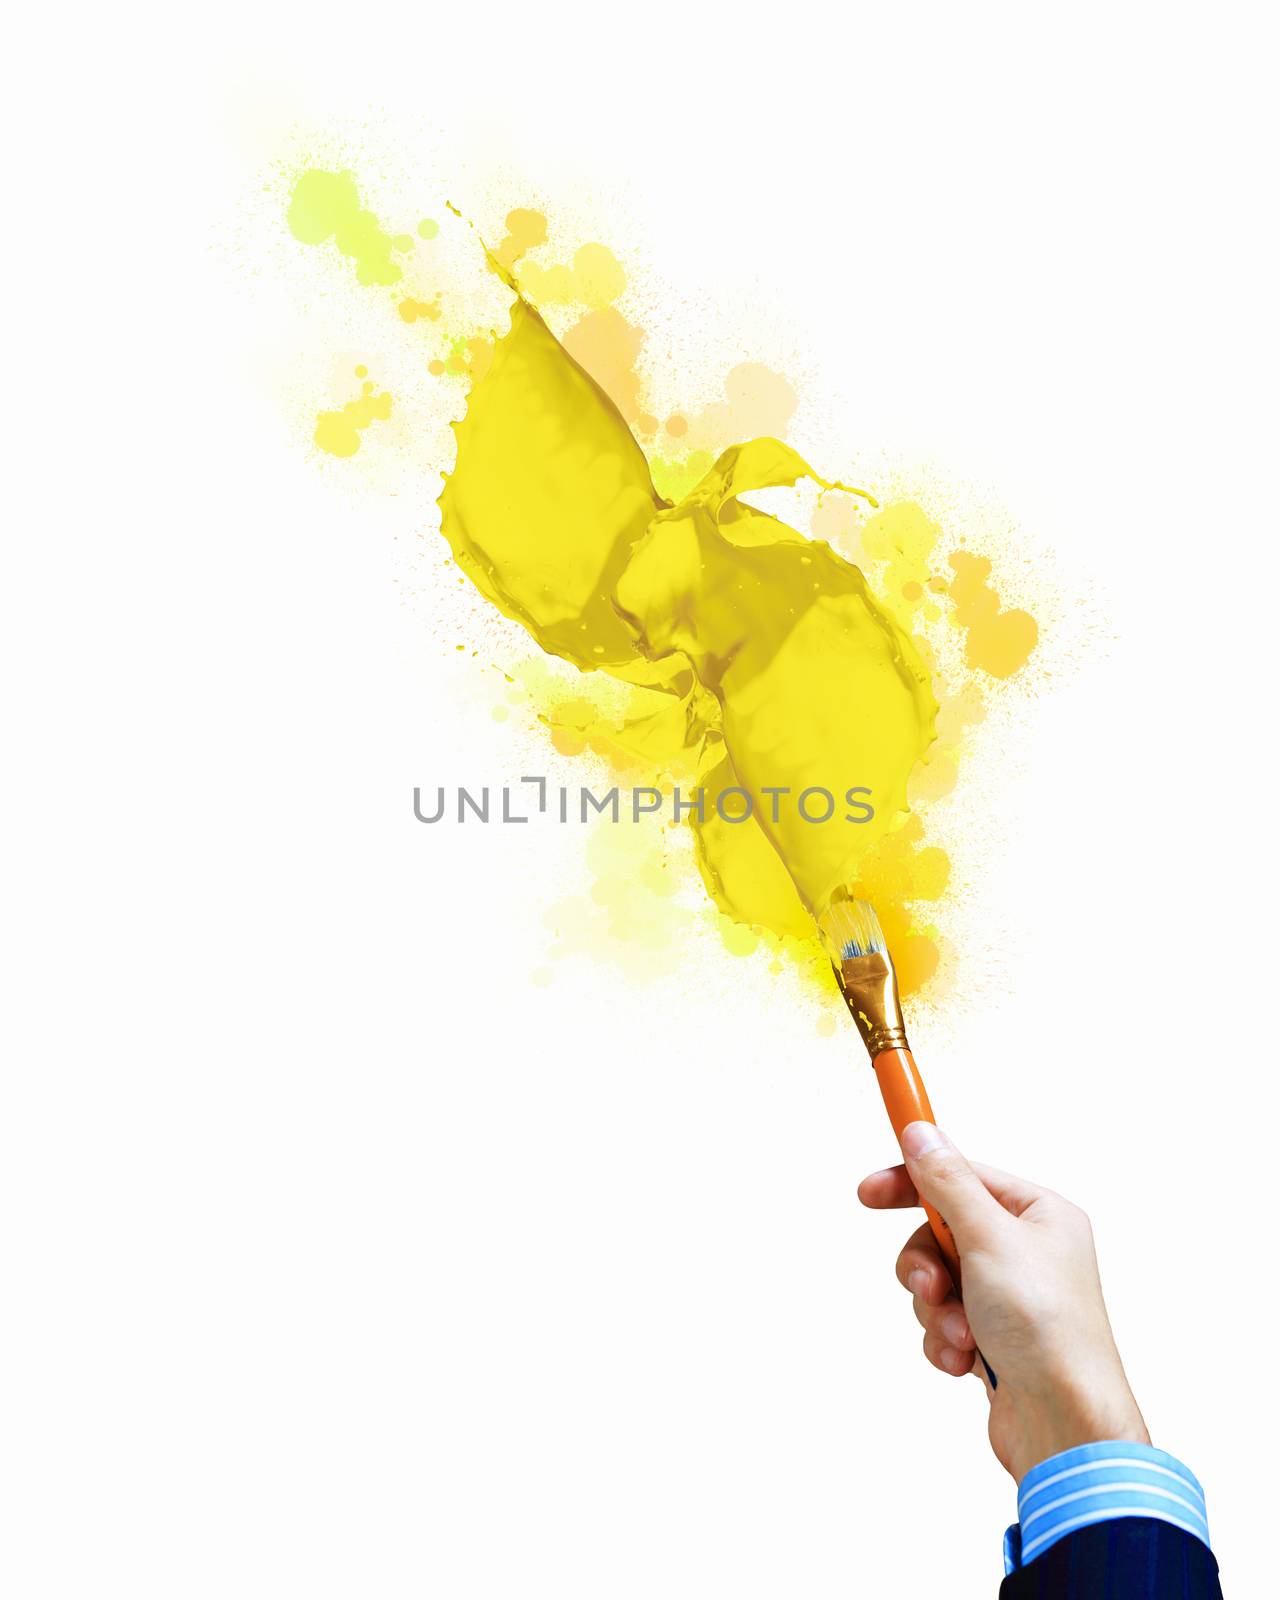 Close-up of human hand holding paint brush making colorful paint splashes